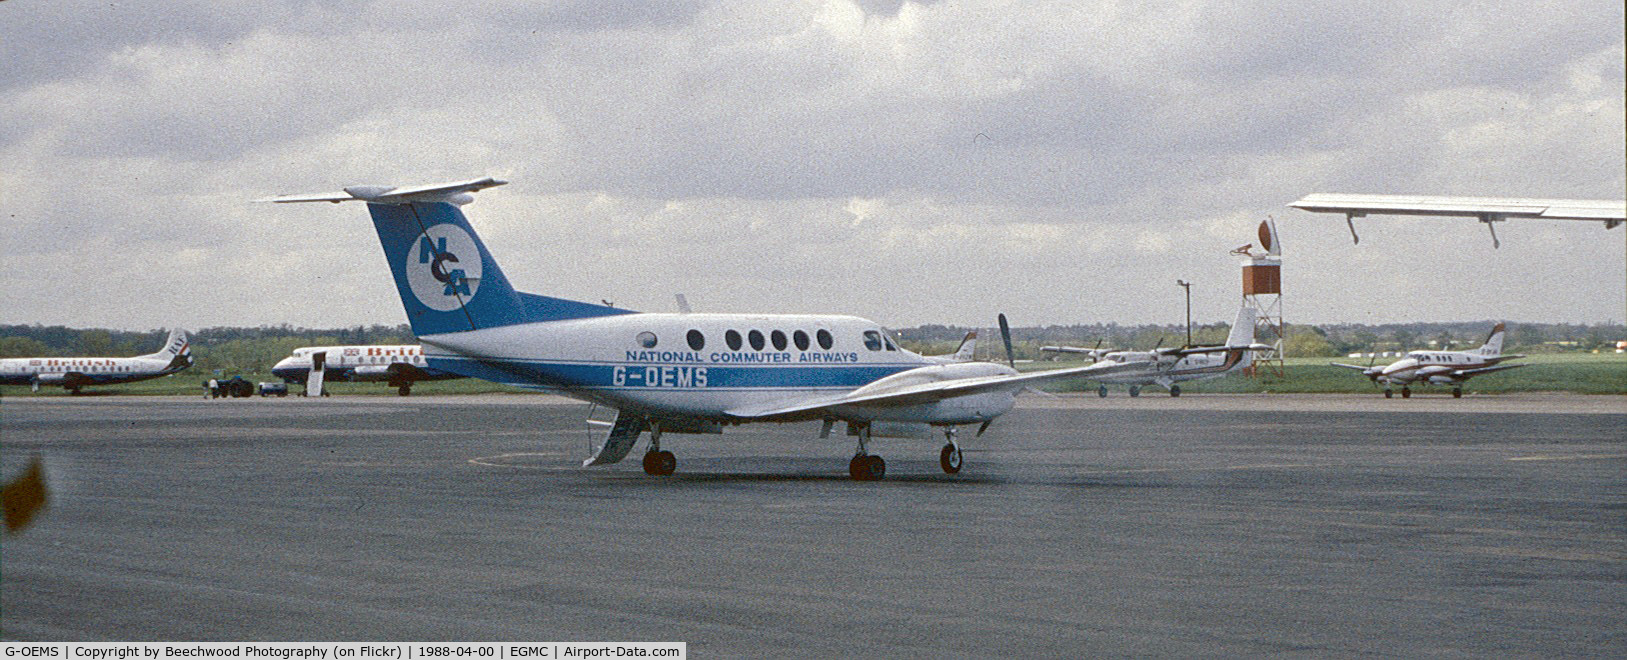 G-OEMS, 1978 Beech 200 Super King Air C/N BB-406, Southend Airport April 1988 National Commuter Airlines